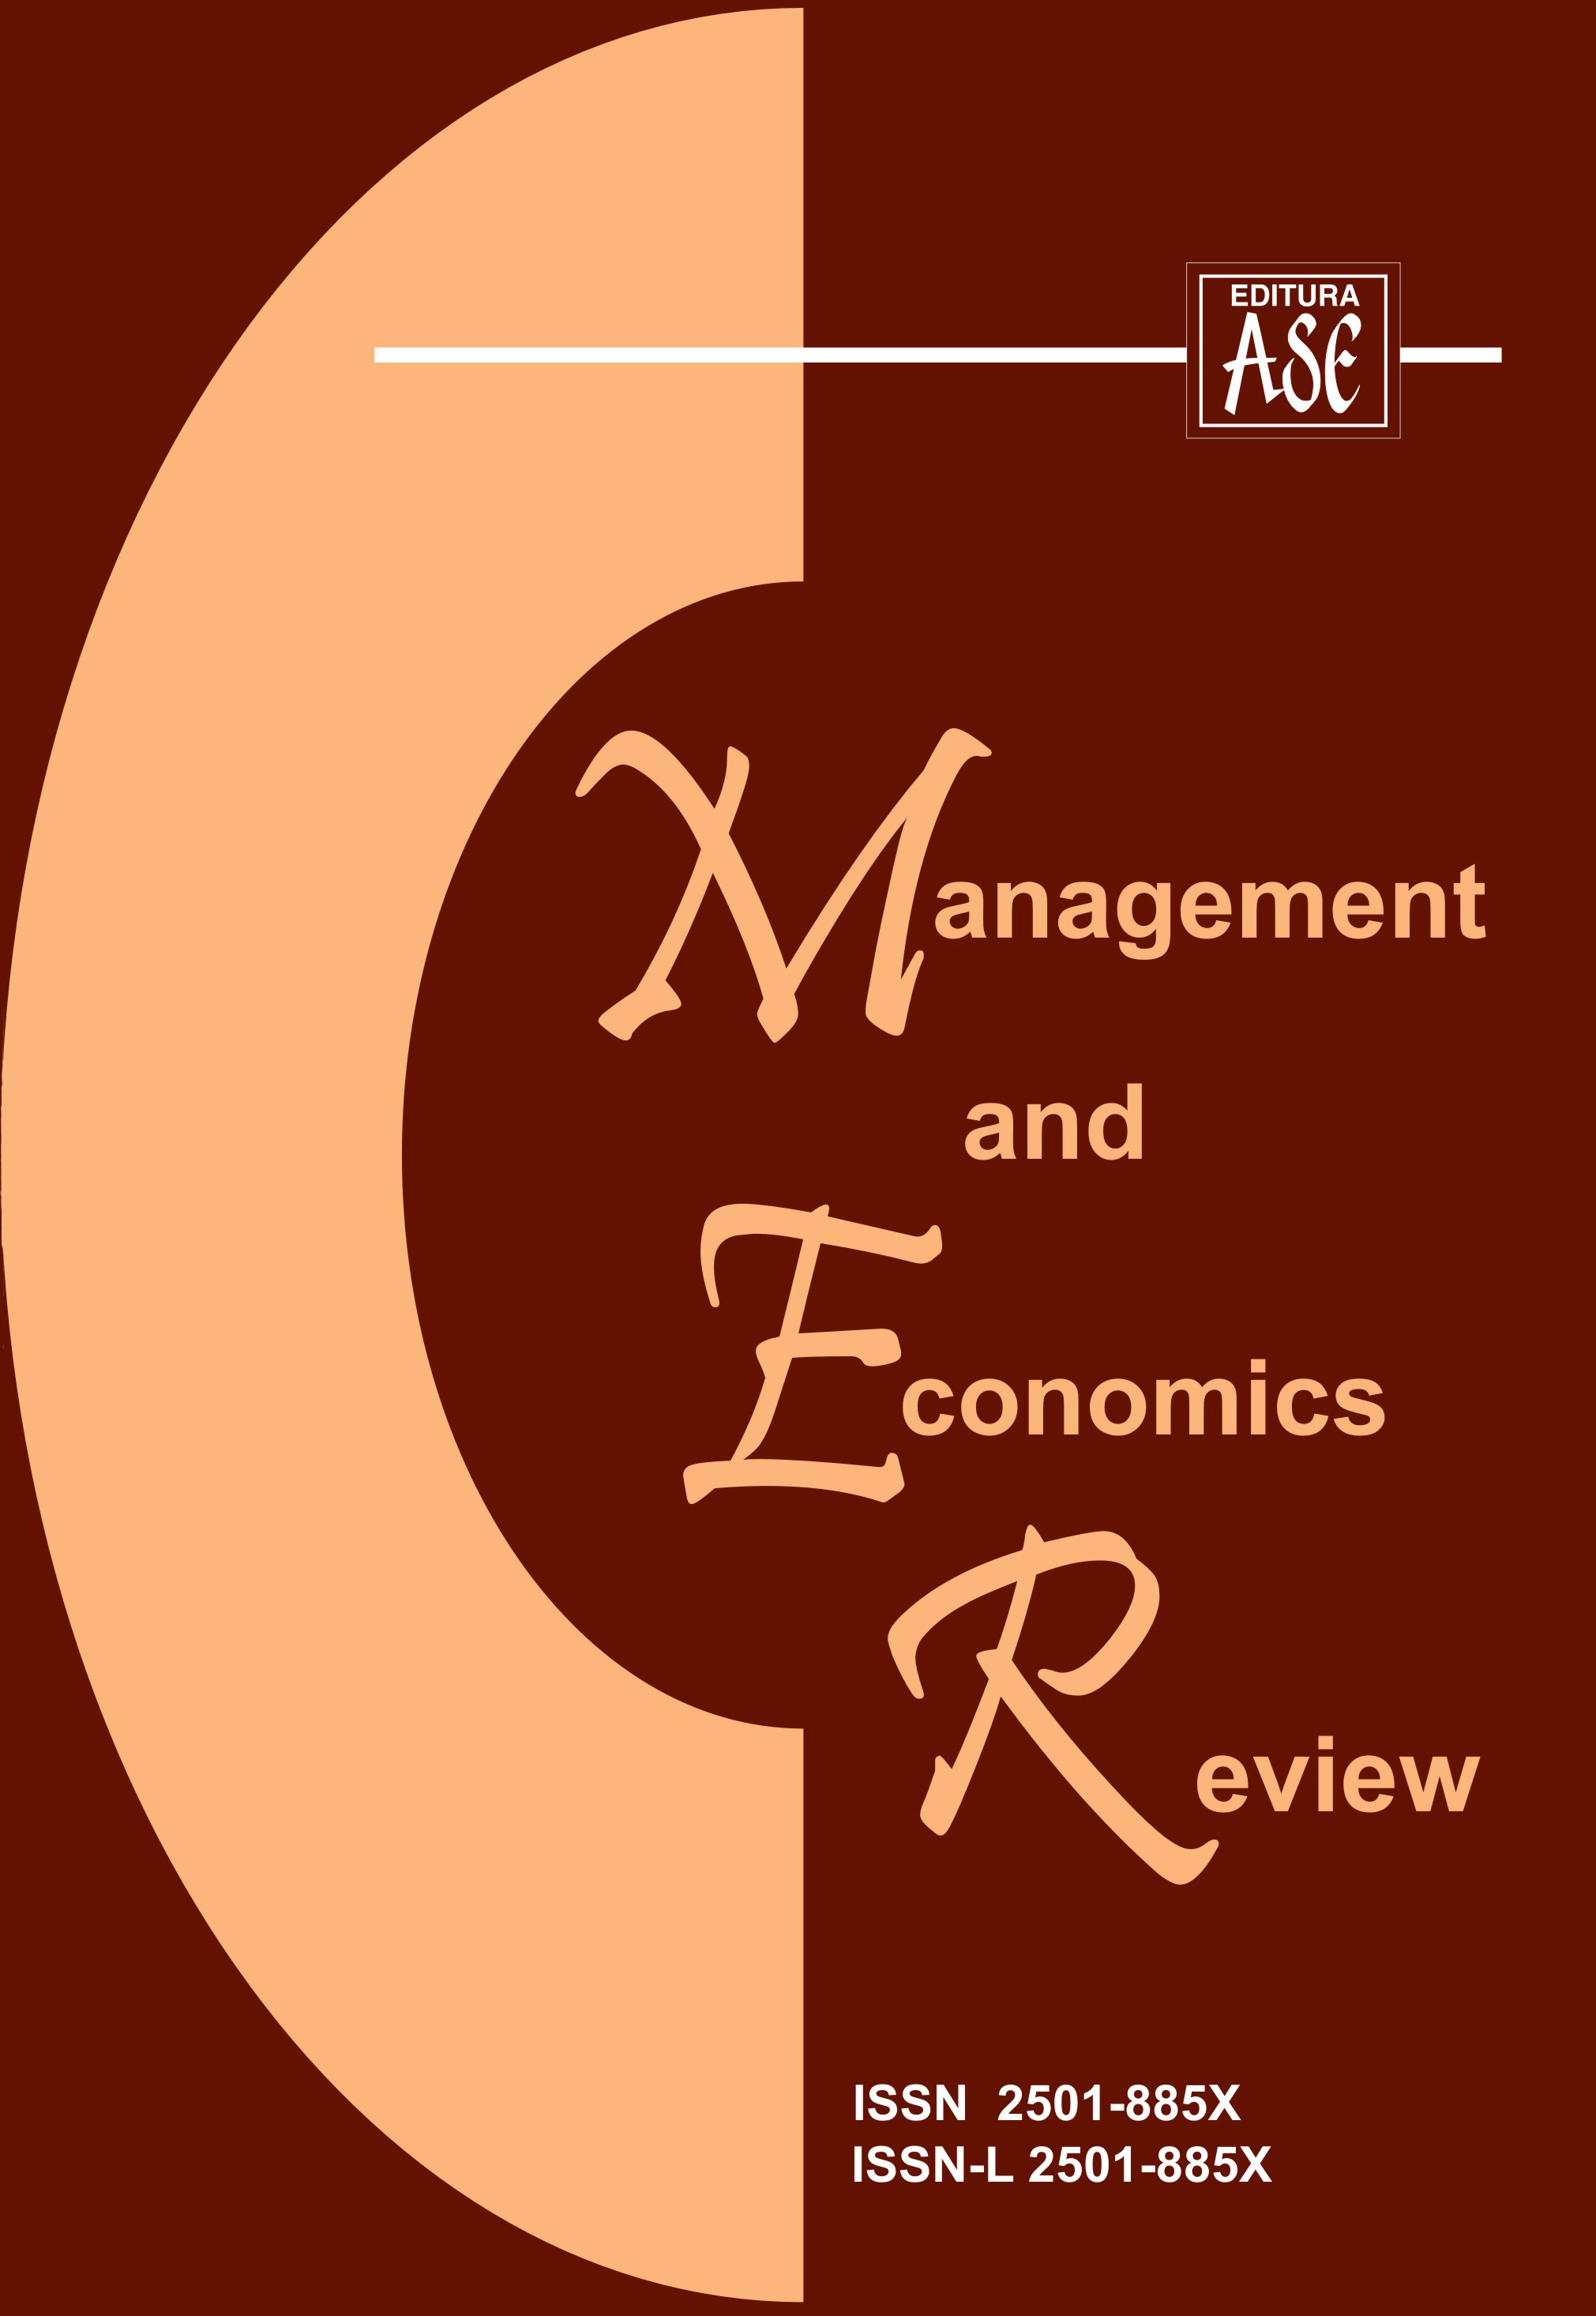 Empirical Assessment of Foreign Exchange Market Effect on the Nigerian Emerging Economy Cover Image